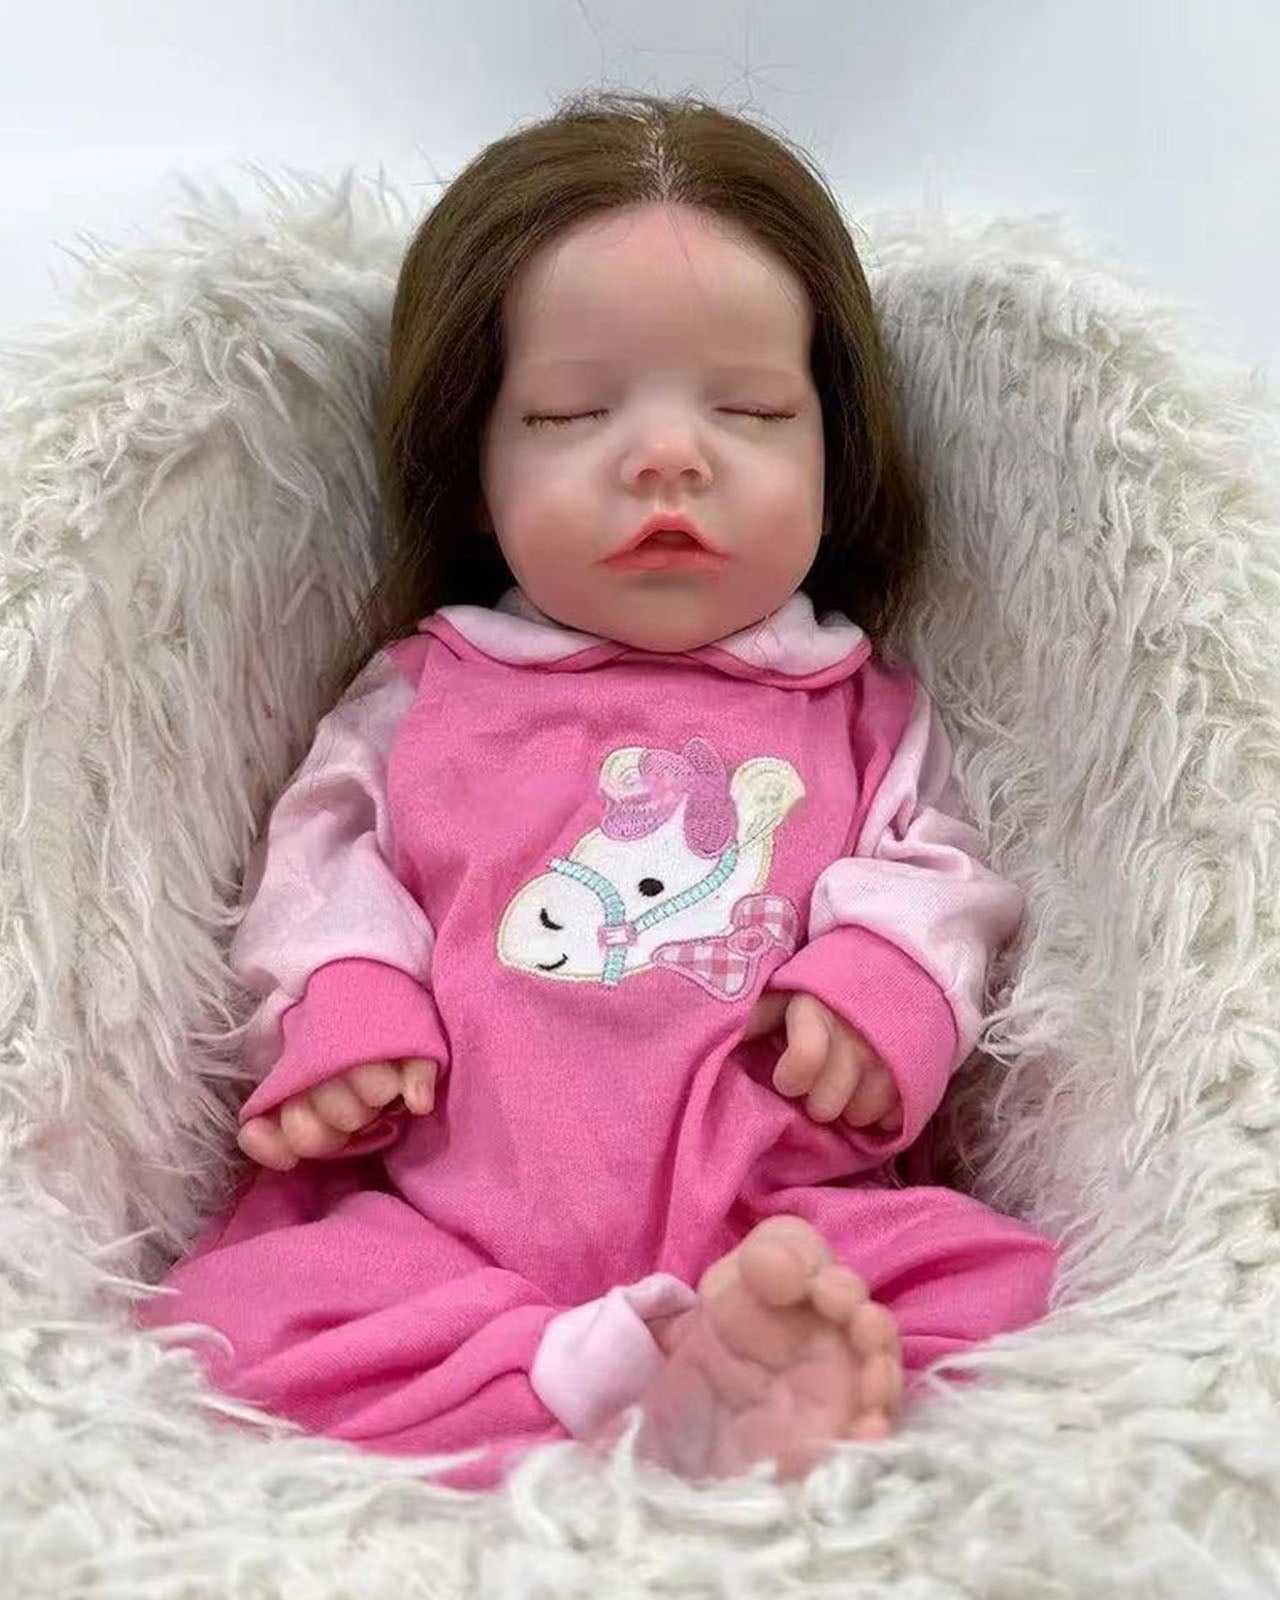 Jennifer - 18" Full Silicone Reborn Baby Dolls Realistic Sleeping Newborn Girl with Chubby and Pliable Little Hands